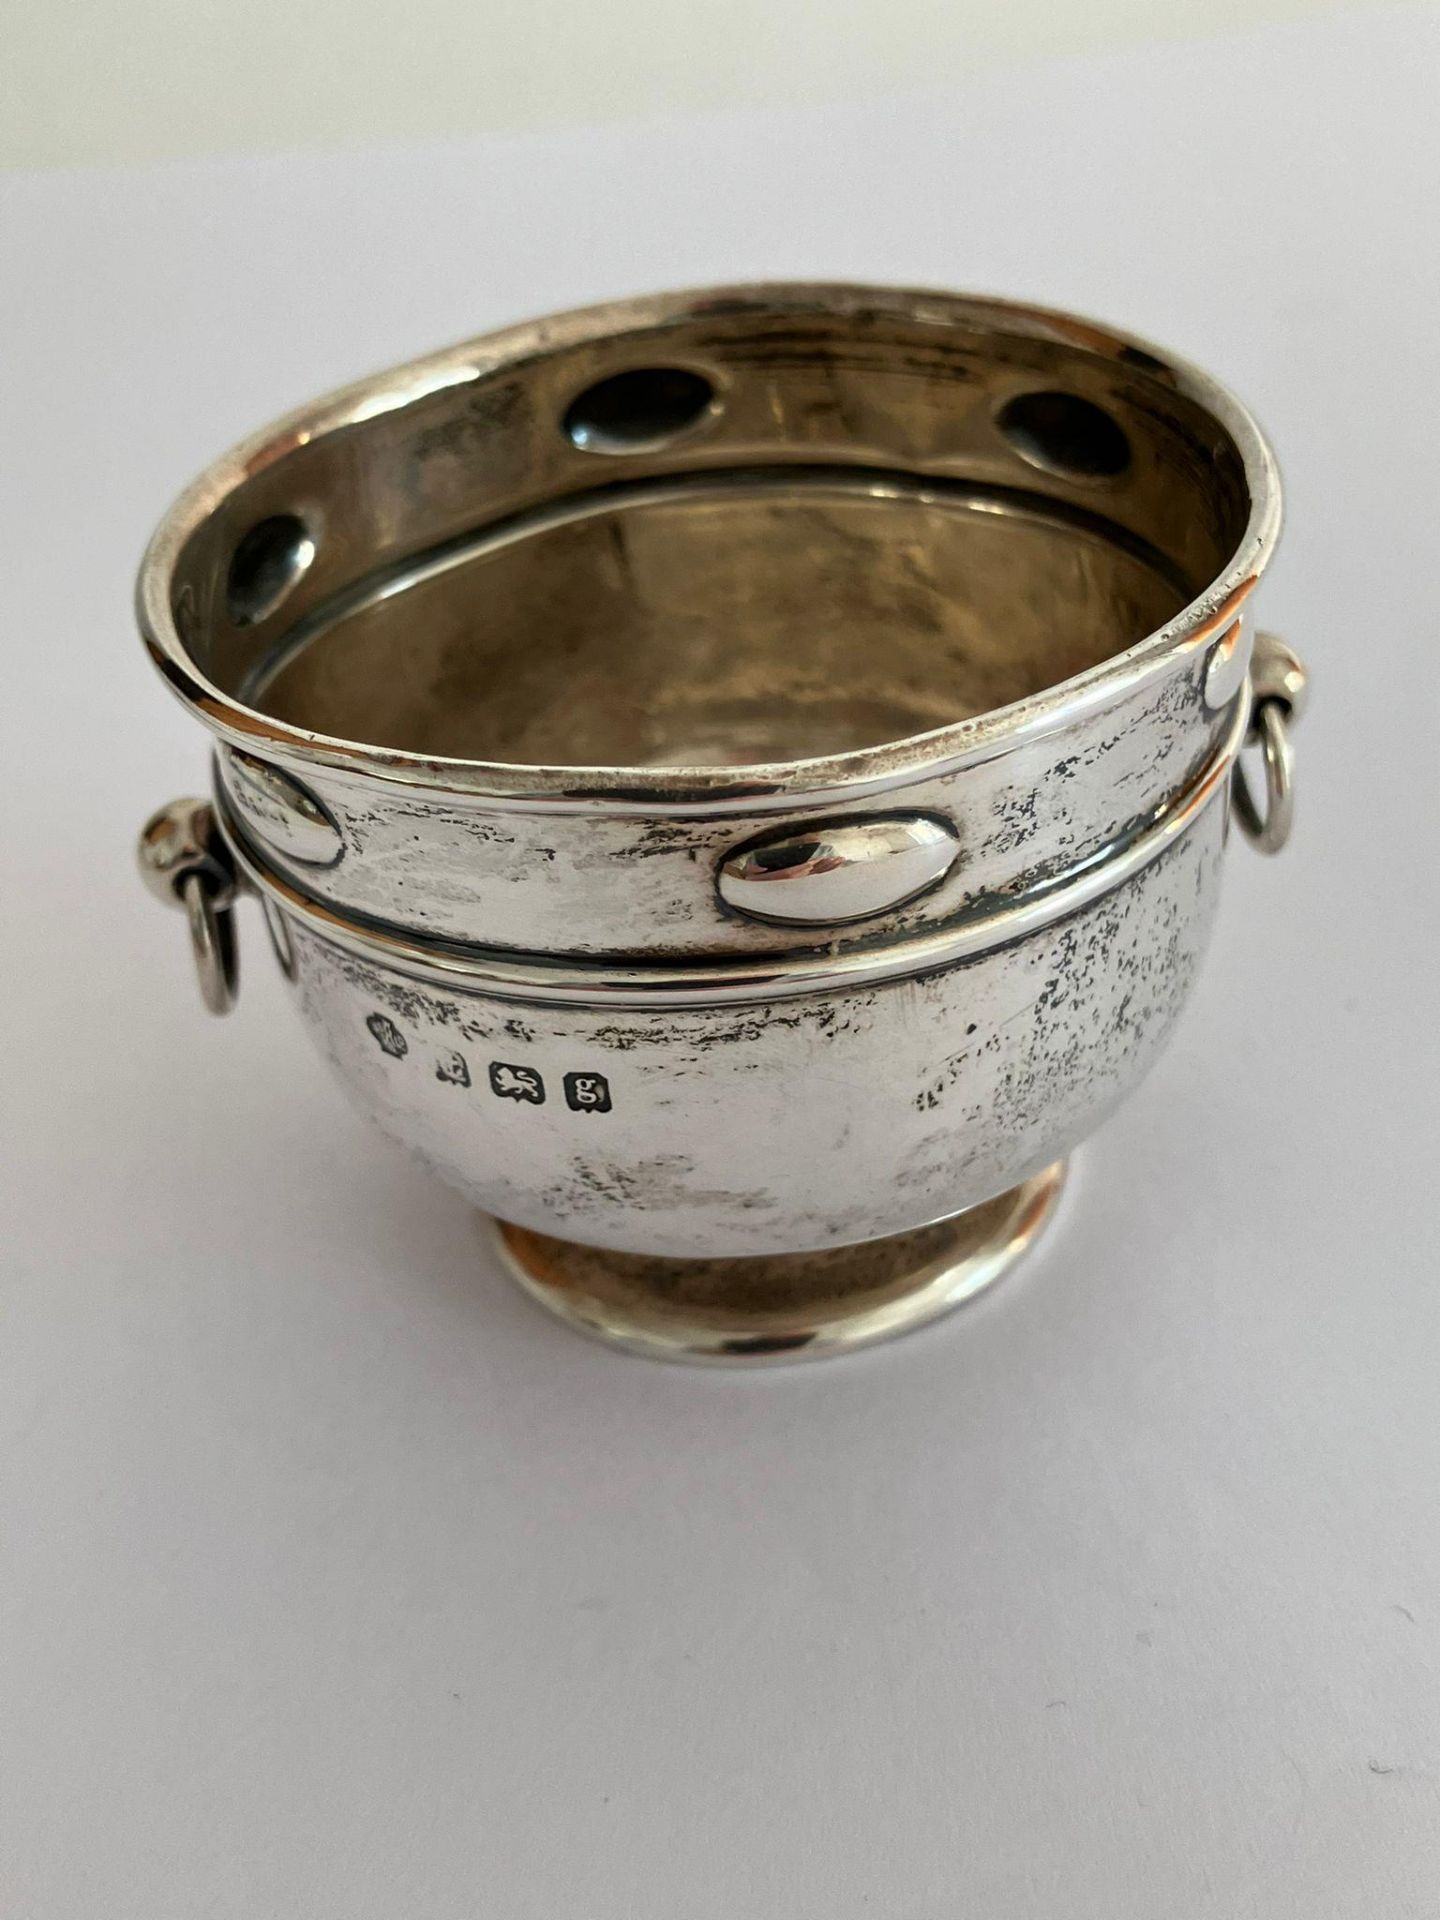 Antique SILVER SALT BOWL,clear hallmark for William Hutton and Sons ,Birmingham 1906. Extremely